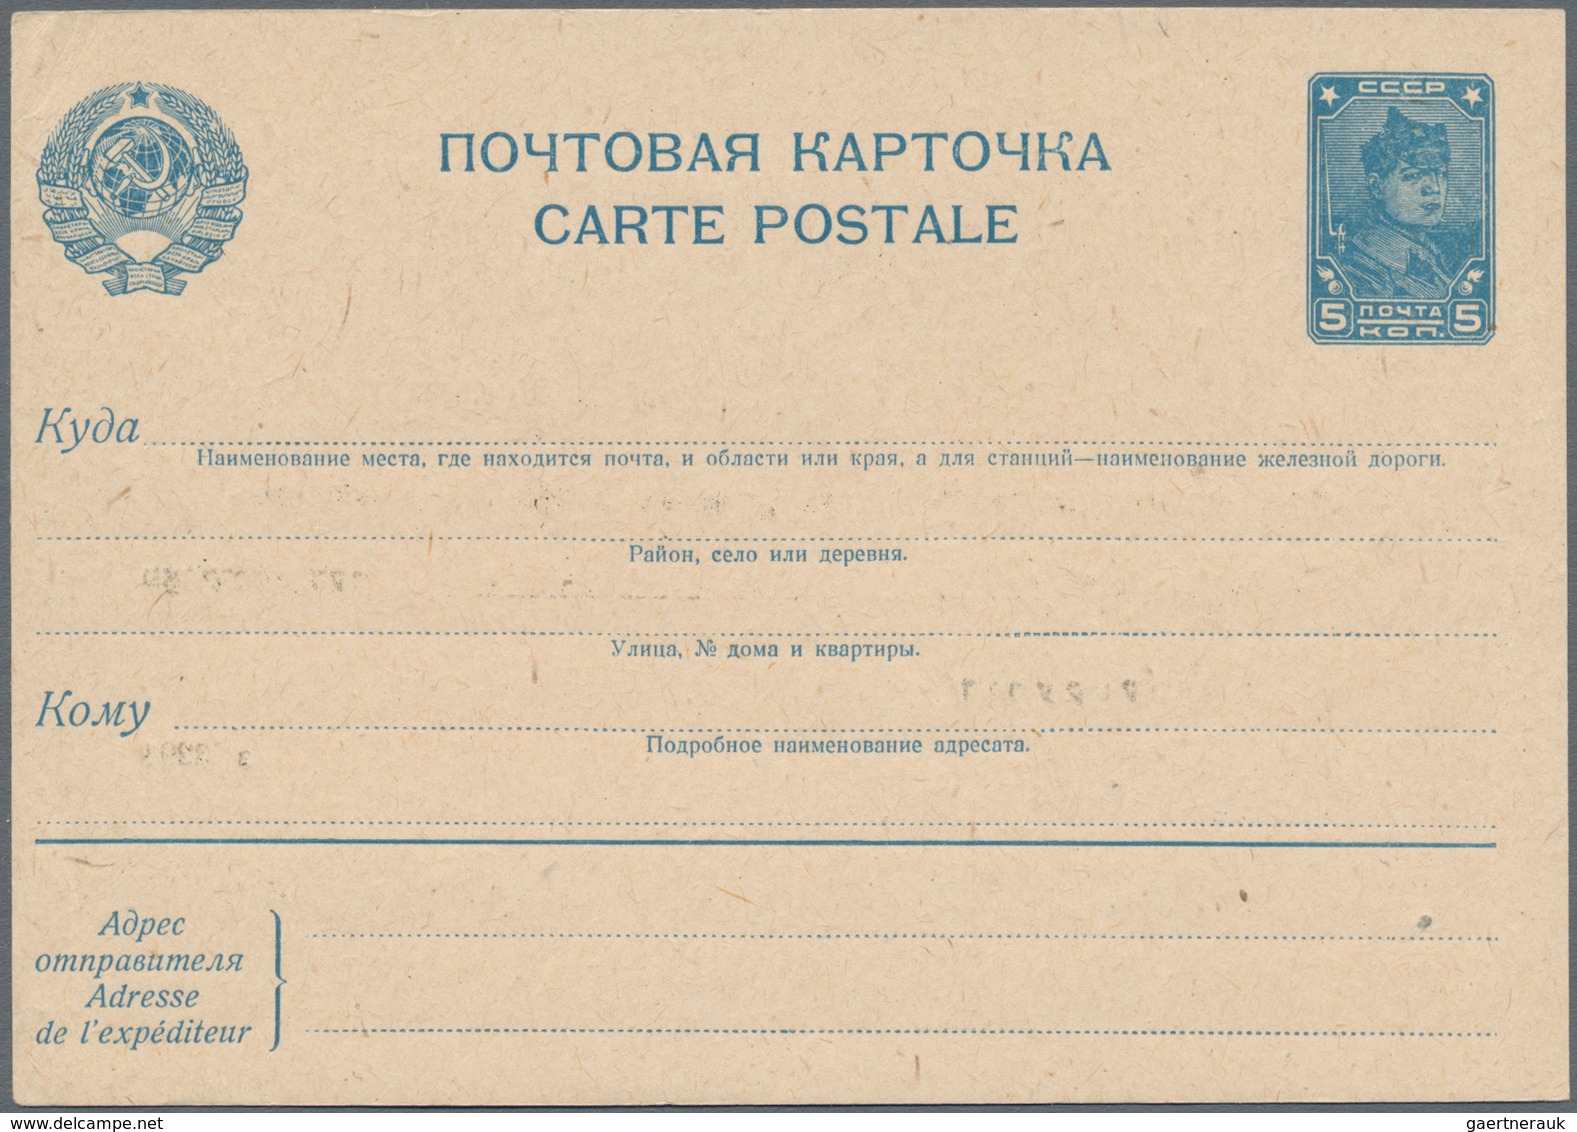 Sowjetunion - Ganzsachen: 1935, Unused And Preprinted Postal Stationery Card, Preprinting In Hebrew - Unclassified